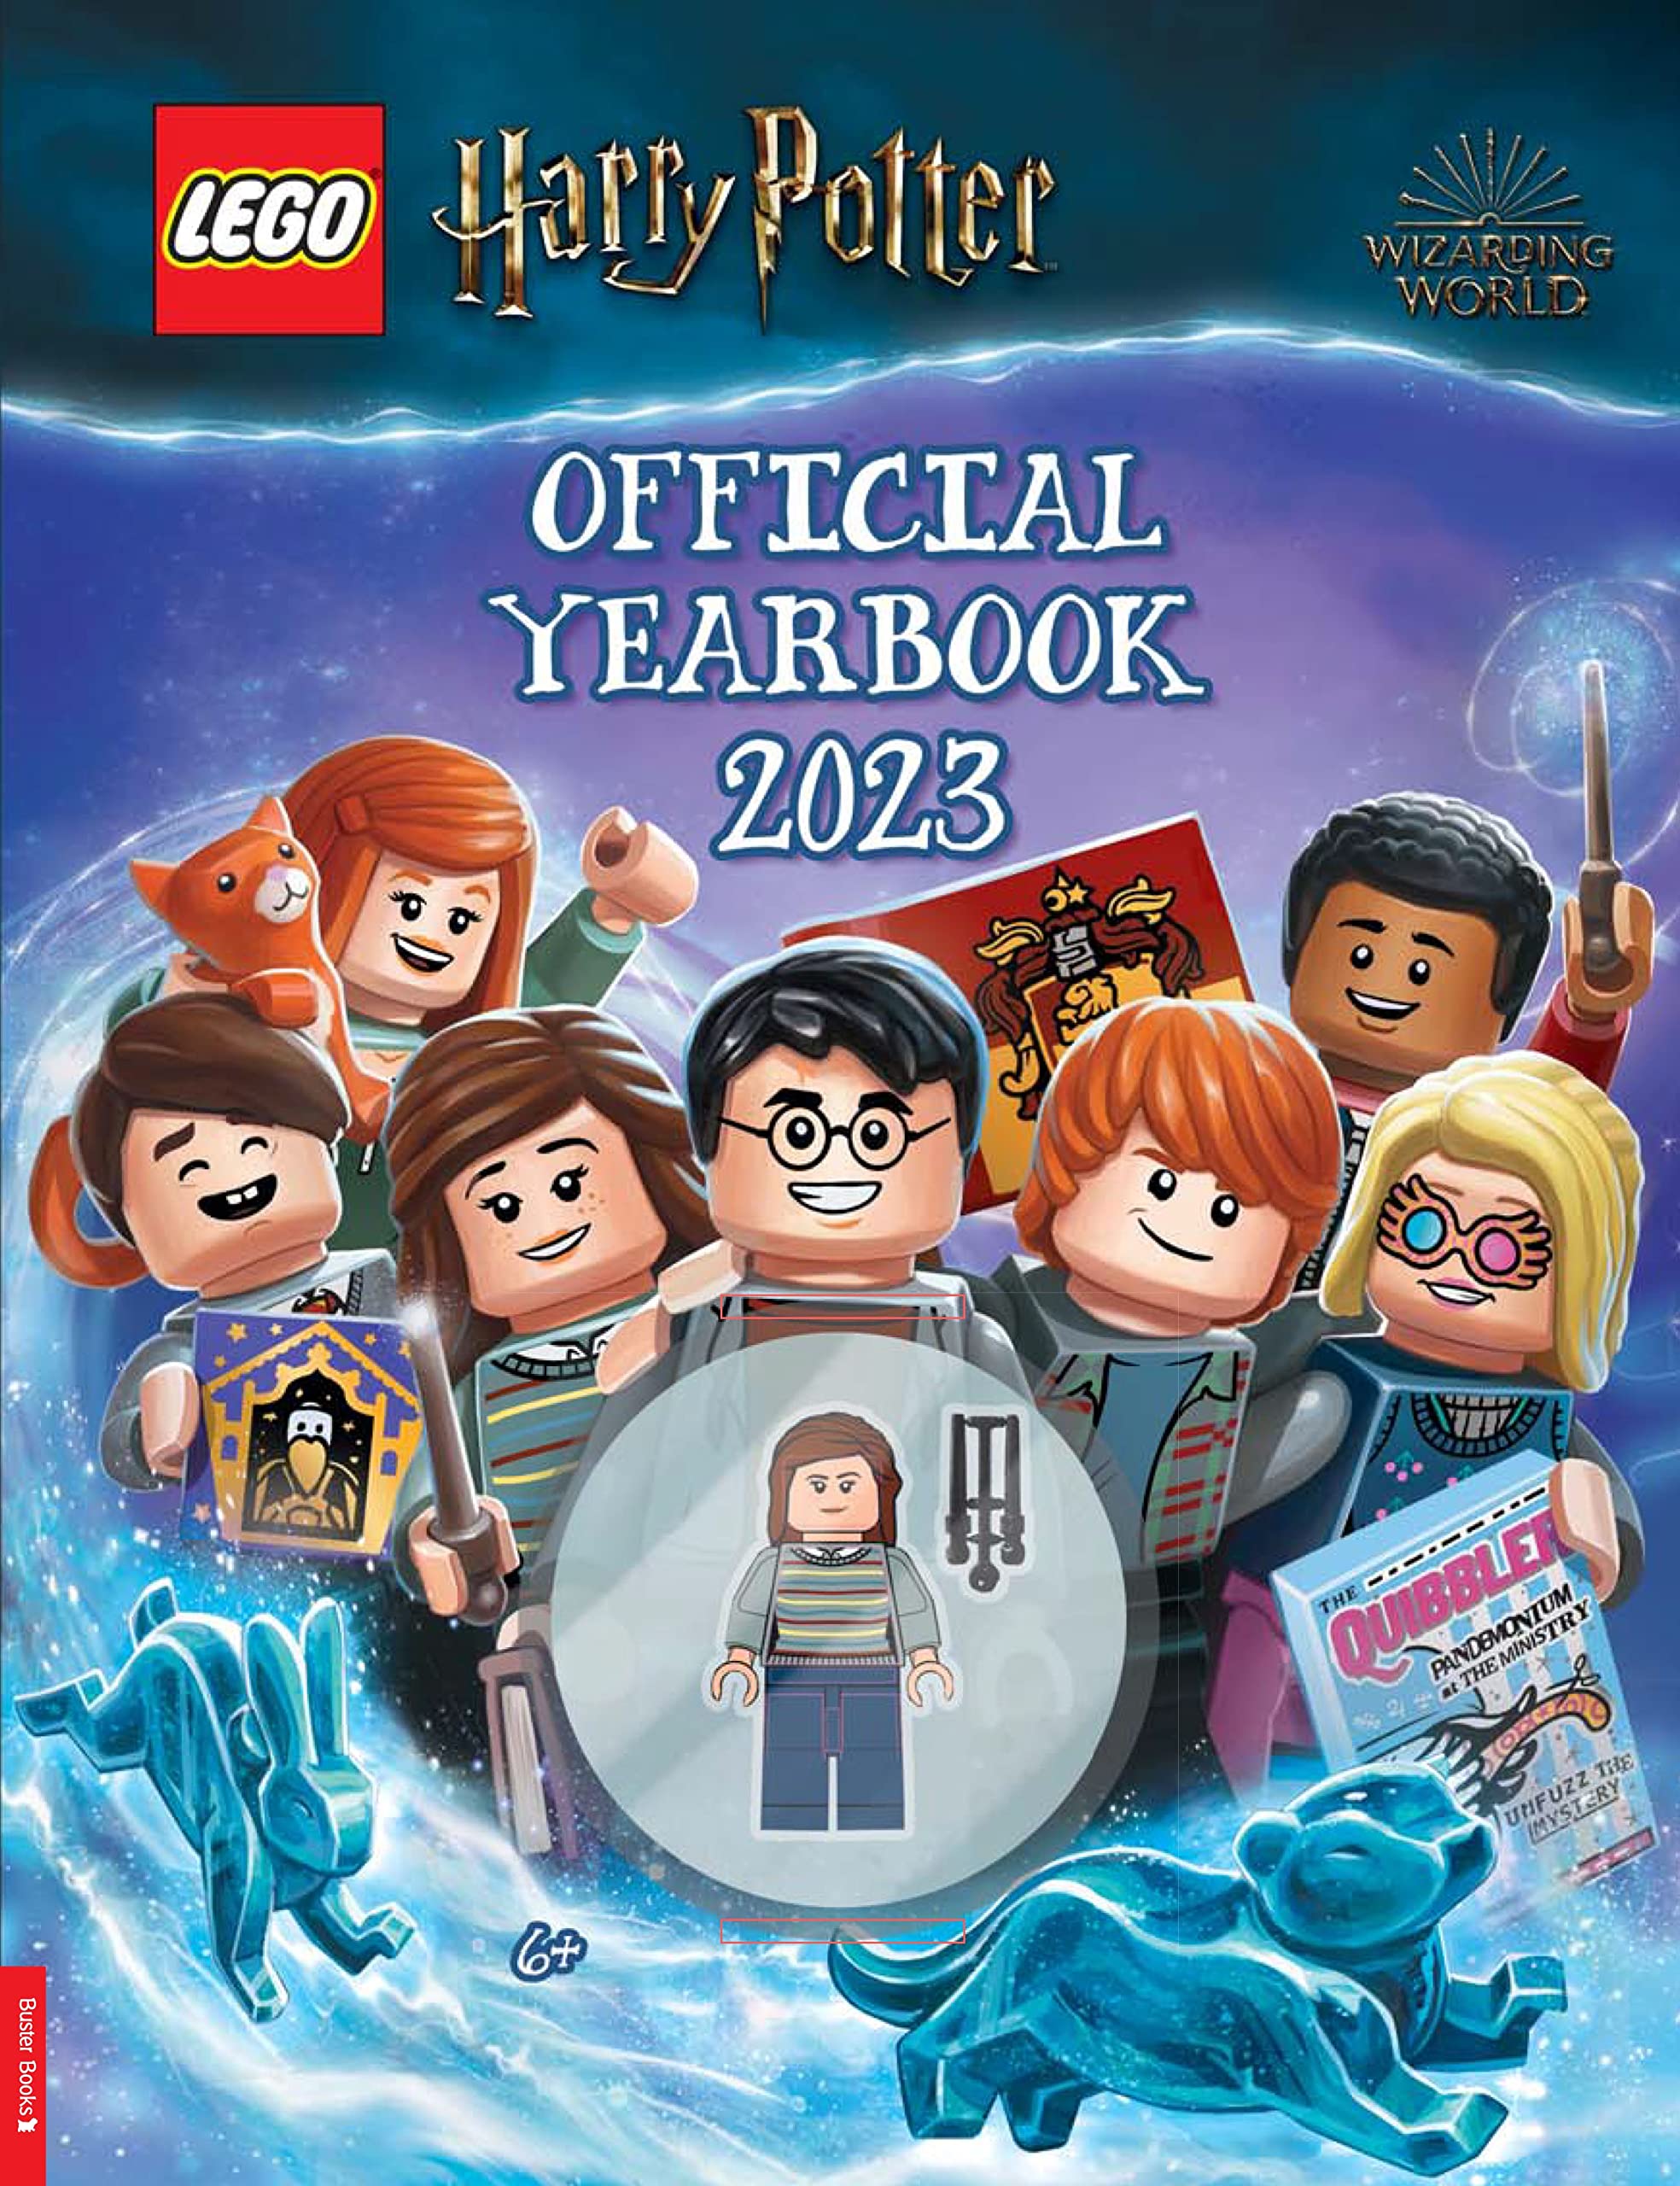 LEGO (R) Harry Potter (TM): Official Yearbook 2023